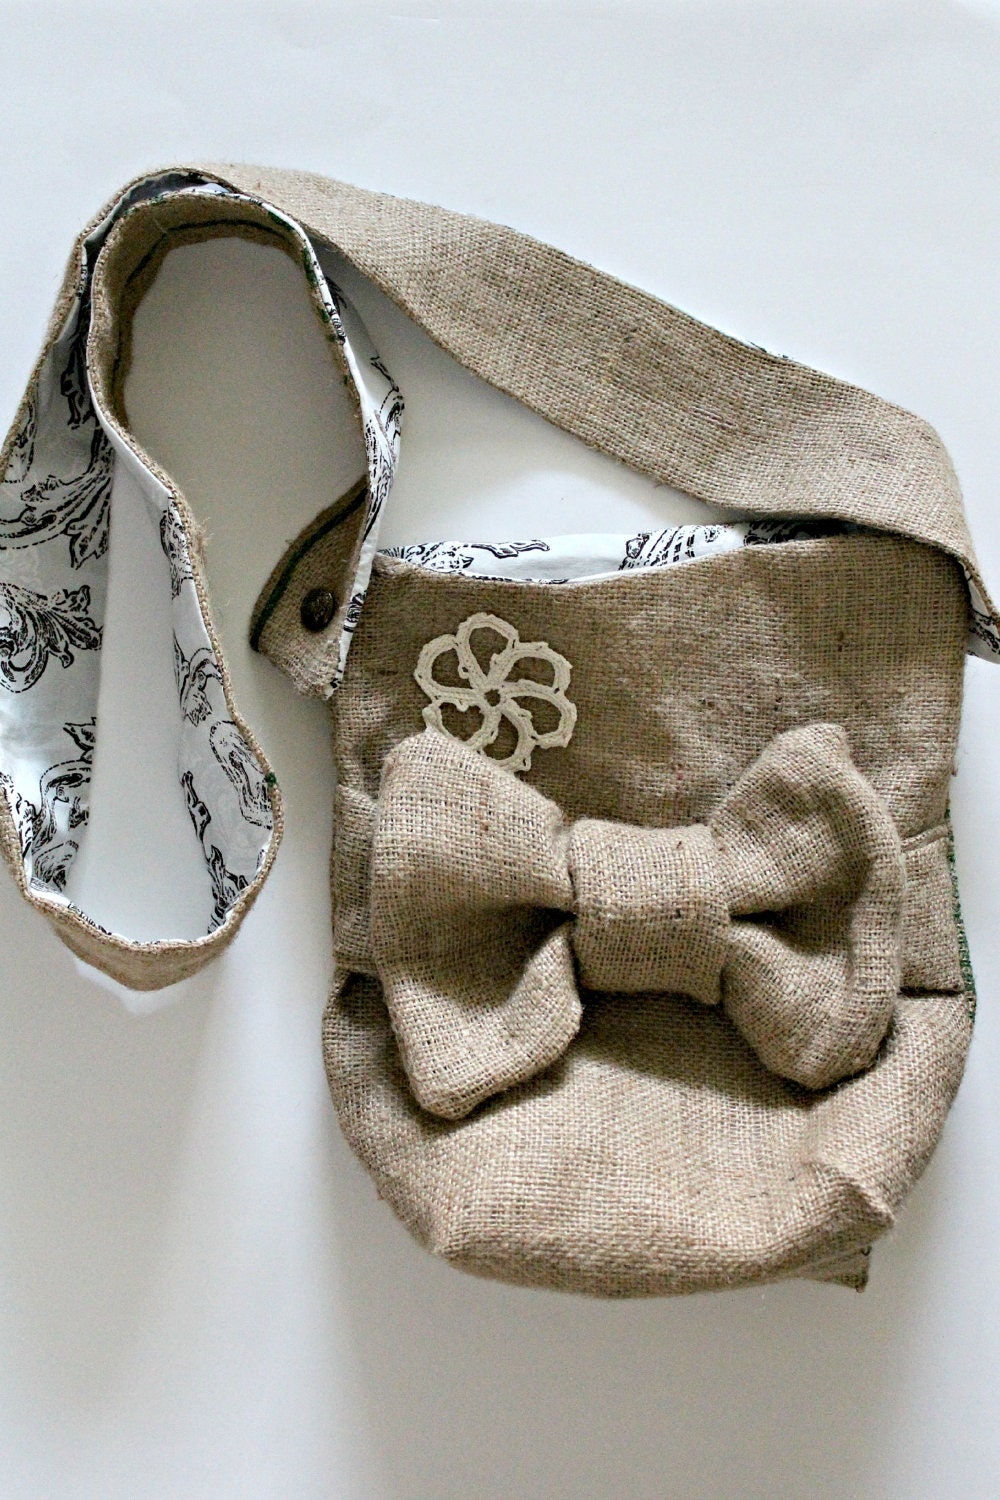 burlap purse with bow adjustable strap coffee bag fully lined with blue and brown print with doily